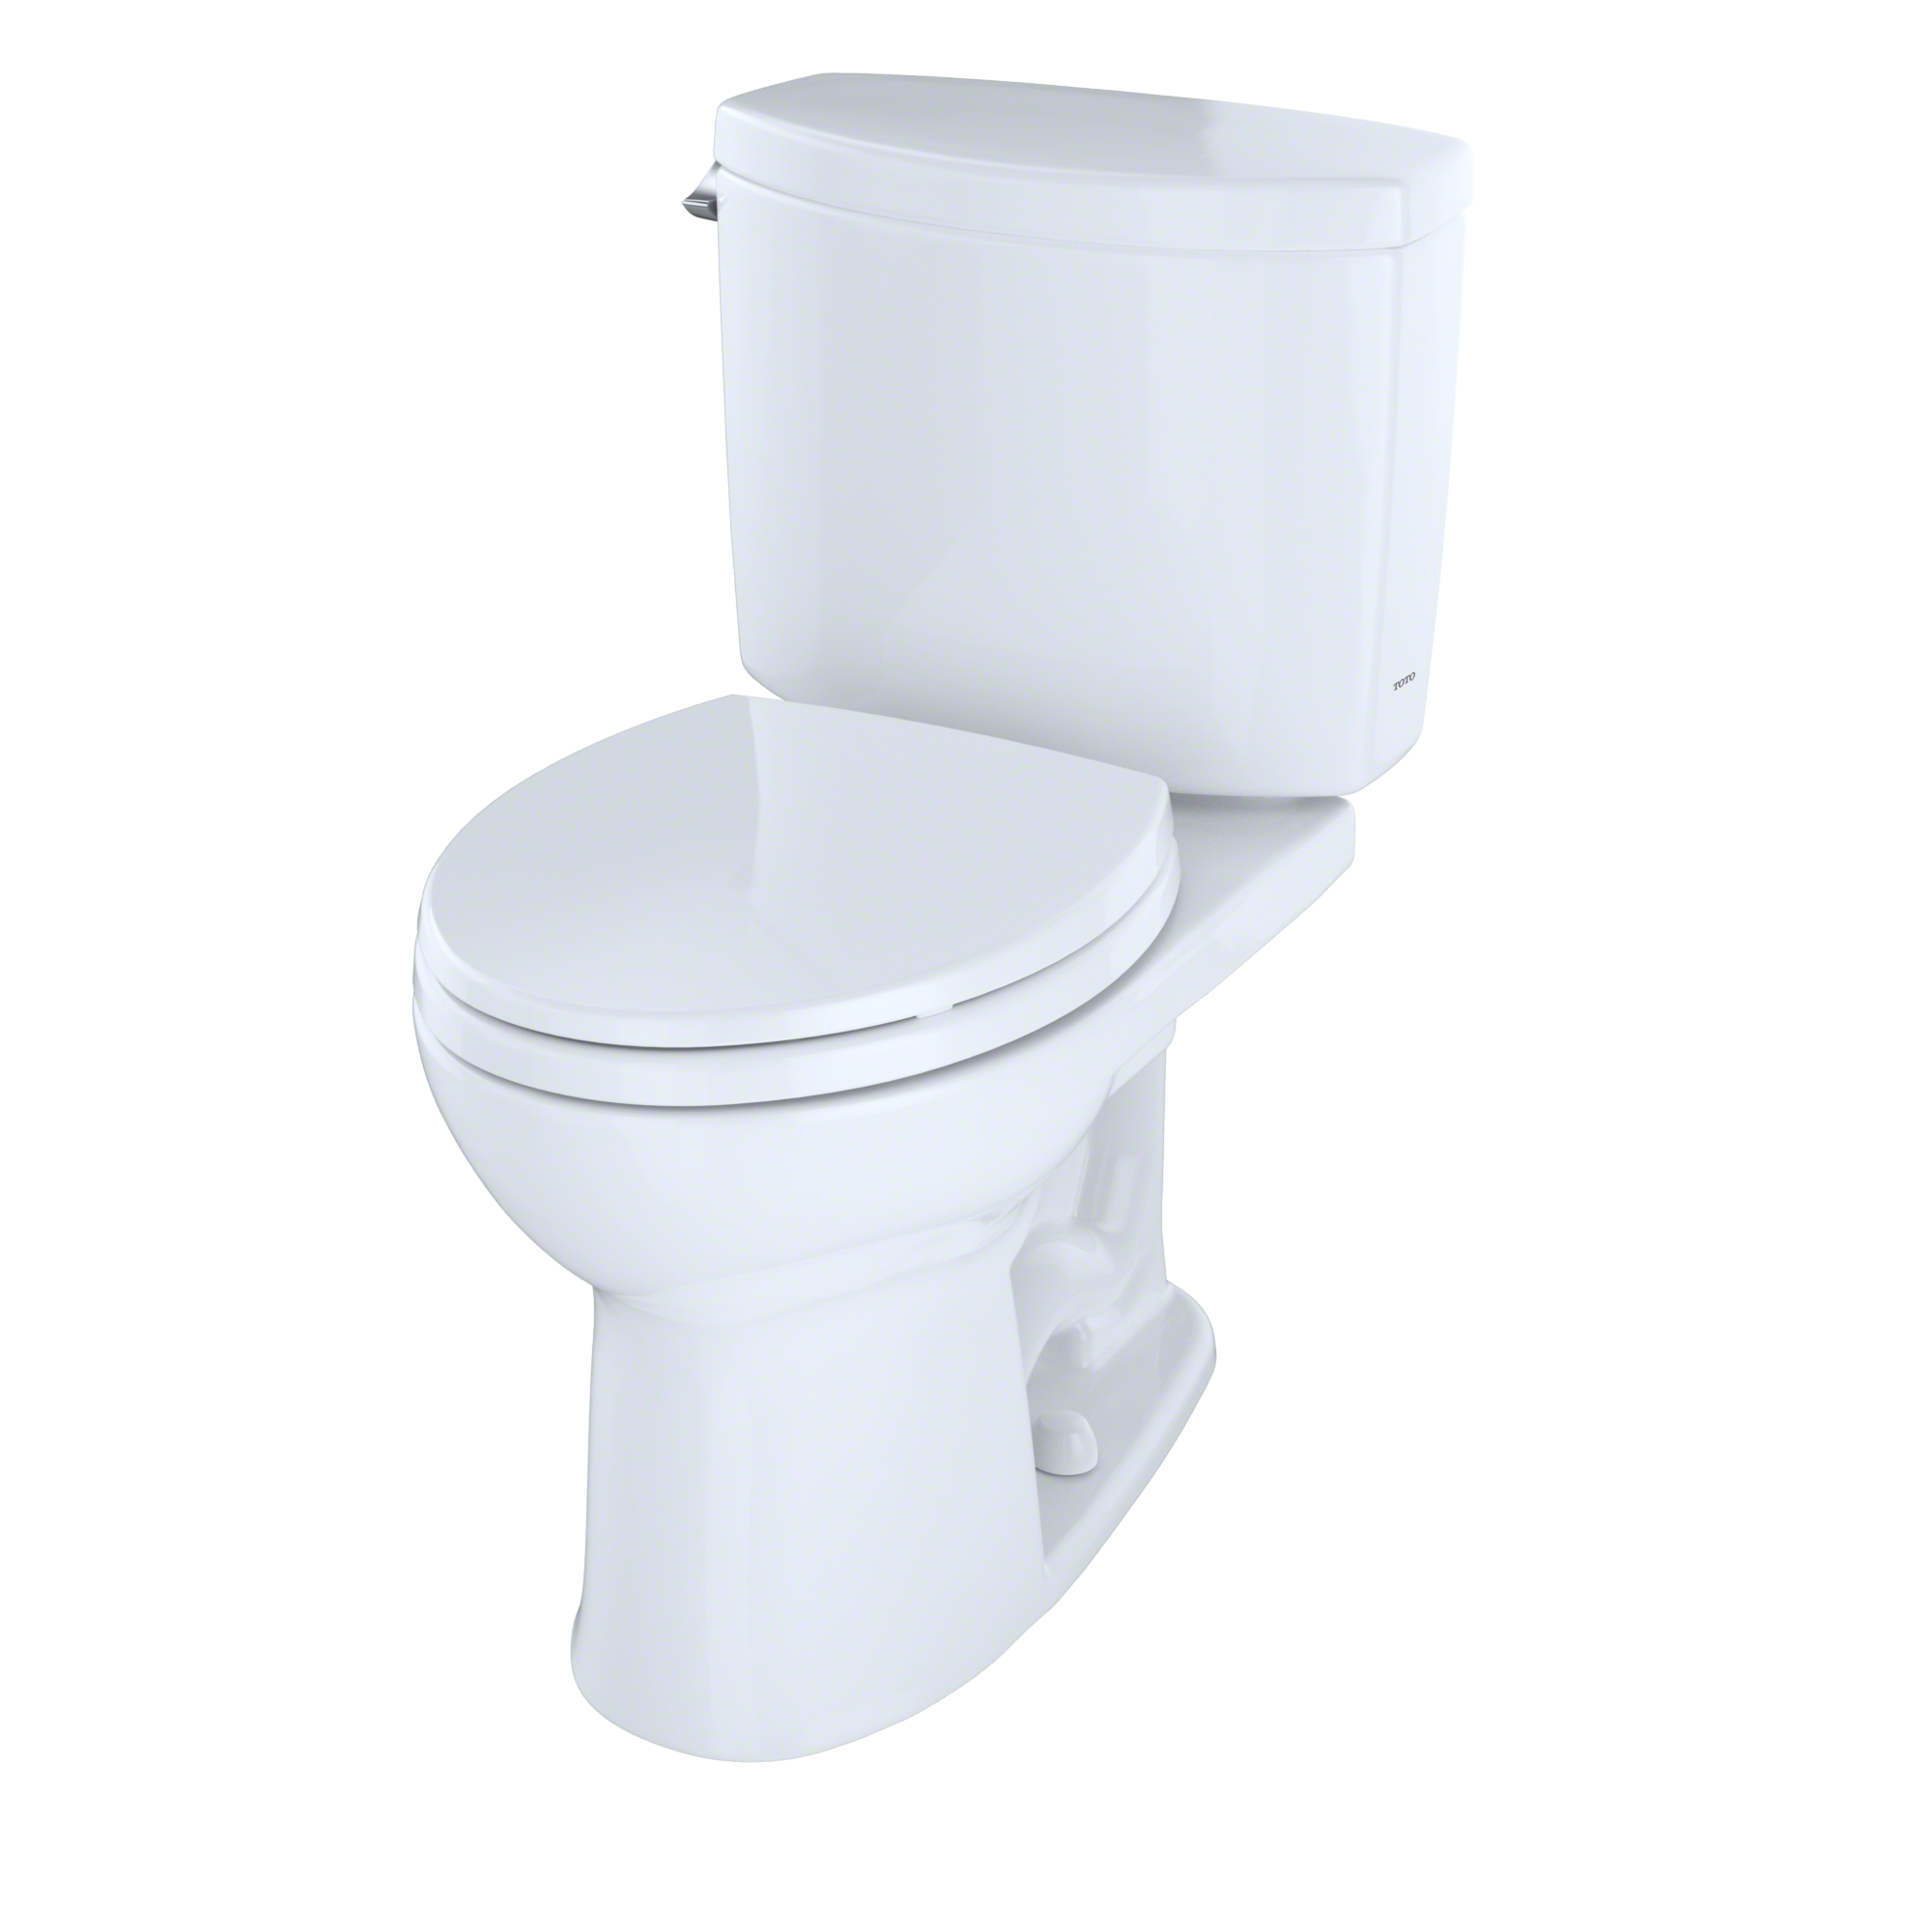 TOTO® Drake® II Two-Piece Round 1.28 GPF Universal Height Toilet with CEFIONTECT, Cotton White - CST453CEFG#01 - image 3 of 5